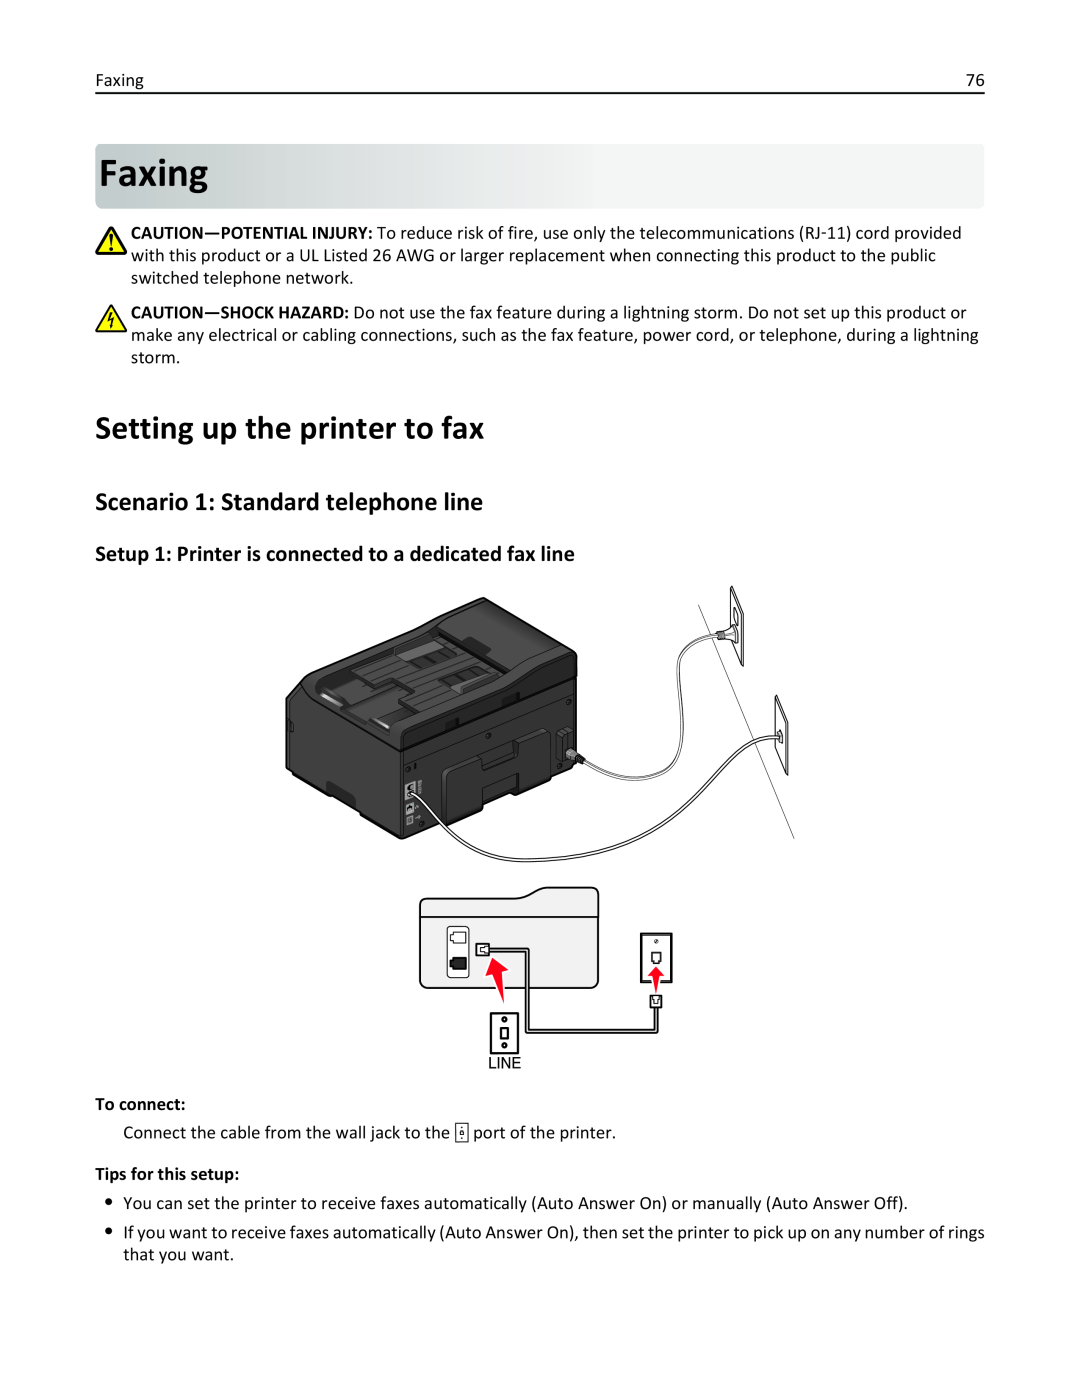 Lexmark PRO4000 Faxing, Setting up the printer to fax, Scenario 1 Standard telephone line, To connect, Tips for this setup 